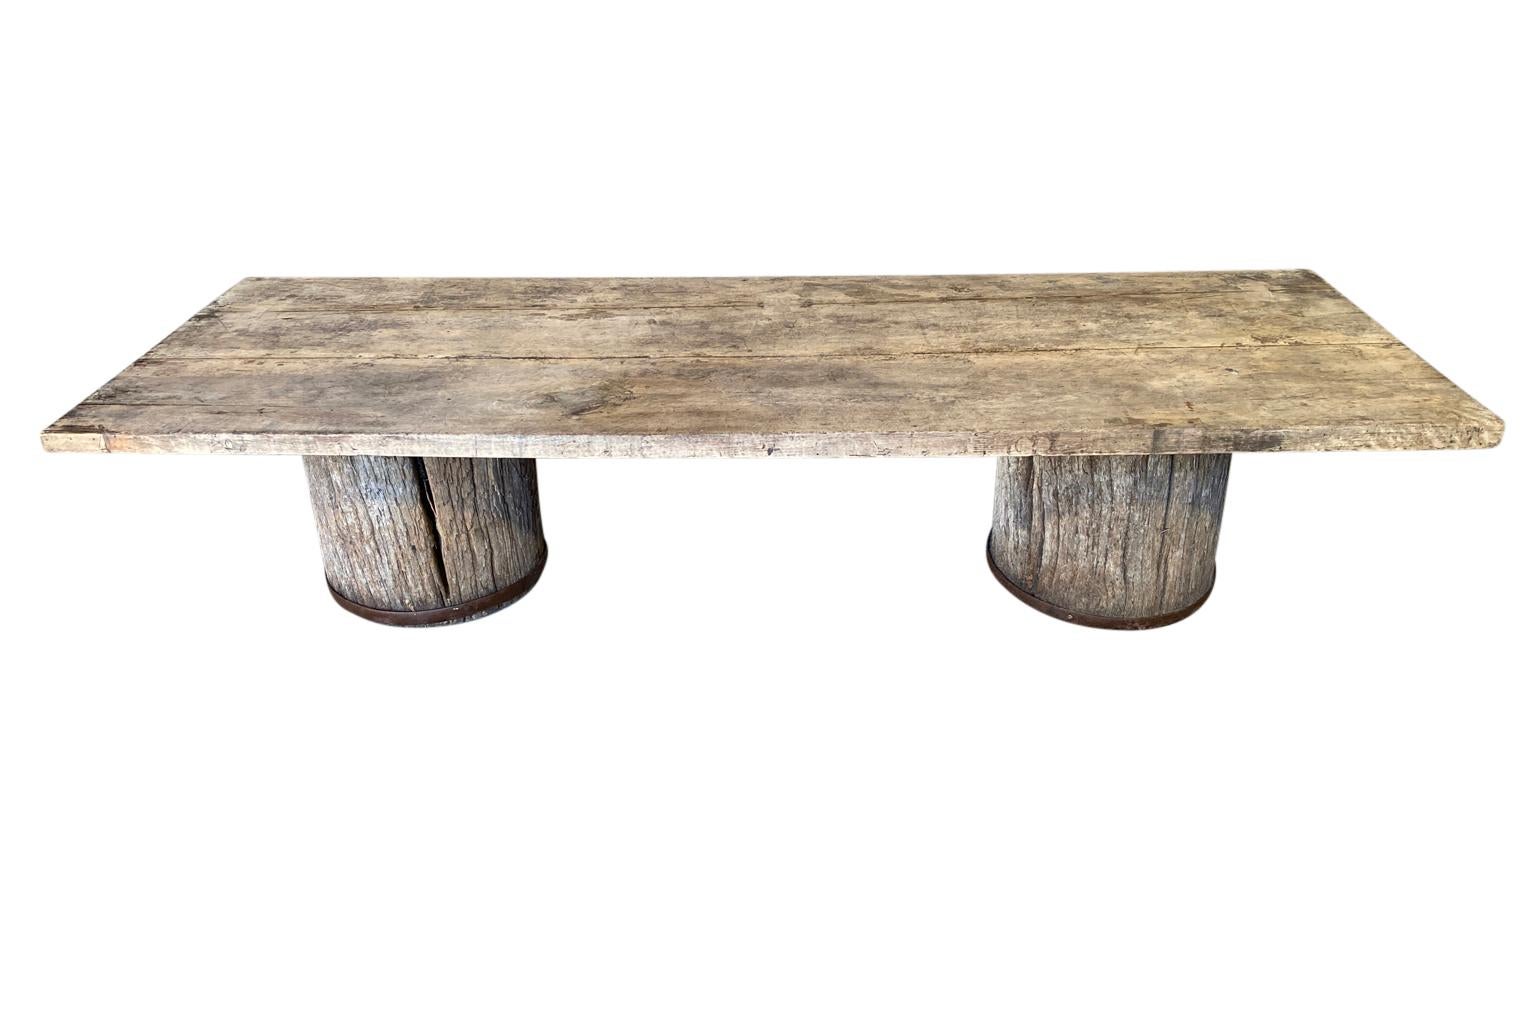 A terrific mid-19th century table basse - coffee table from the South of France. Wonderfully constructed with a beautifully patina'd plateau and legs cut down from columns in naturally washed walnut. A sensational coffee table for any casual